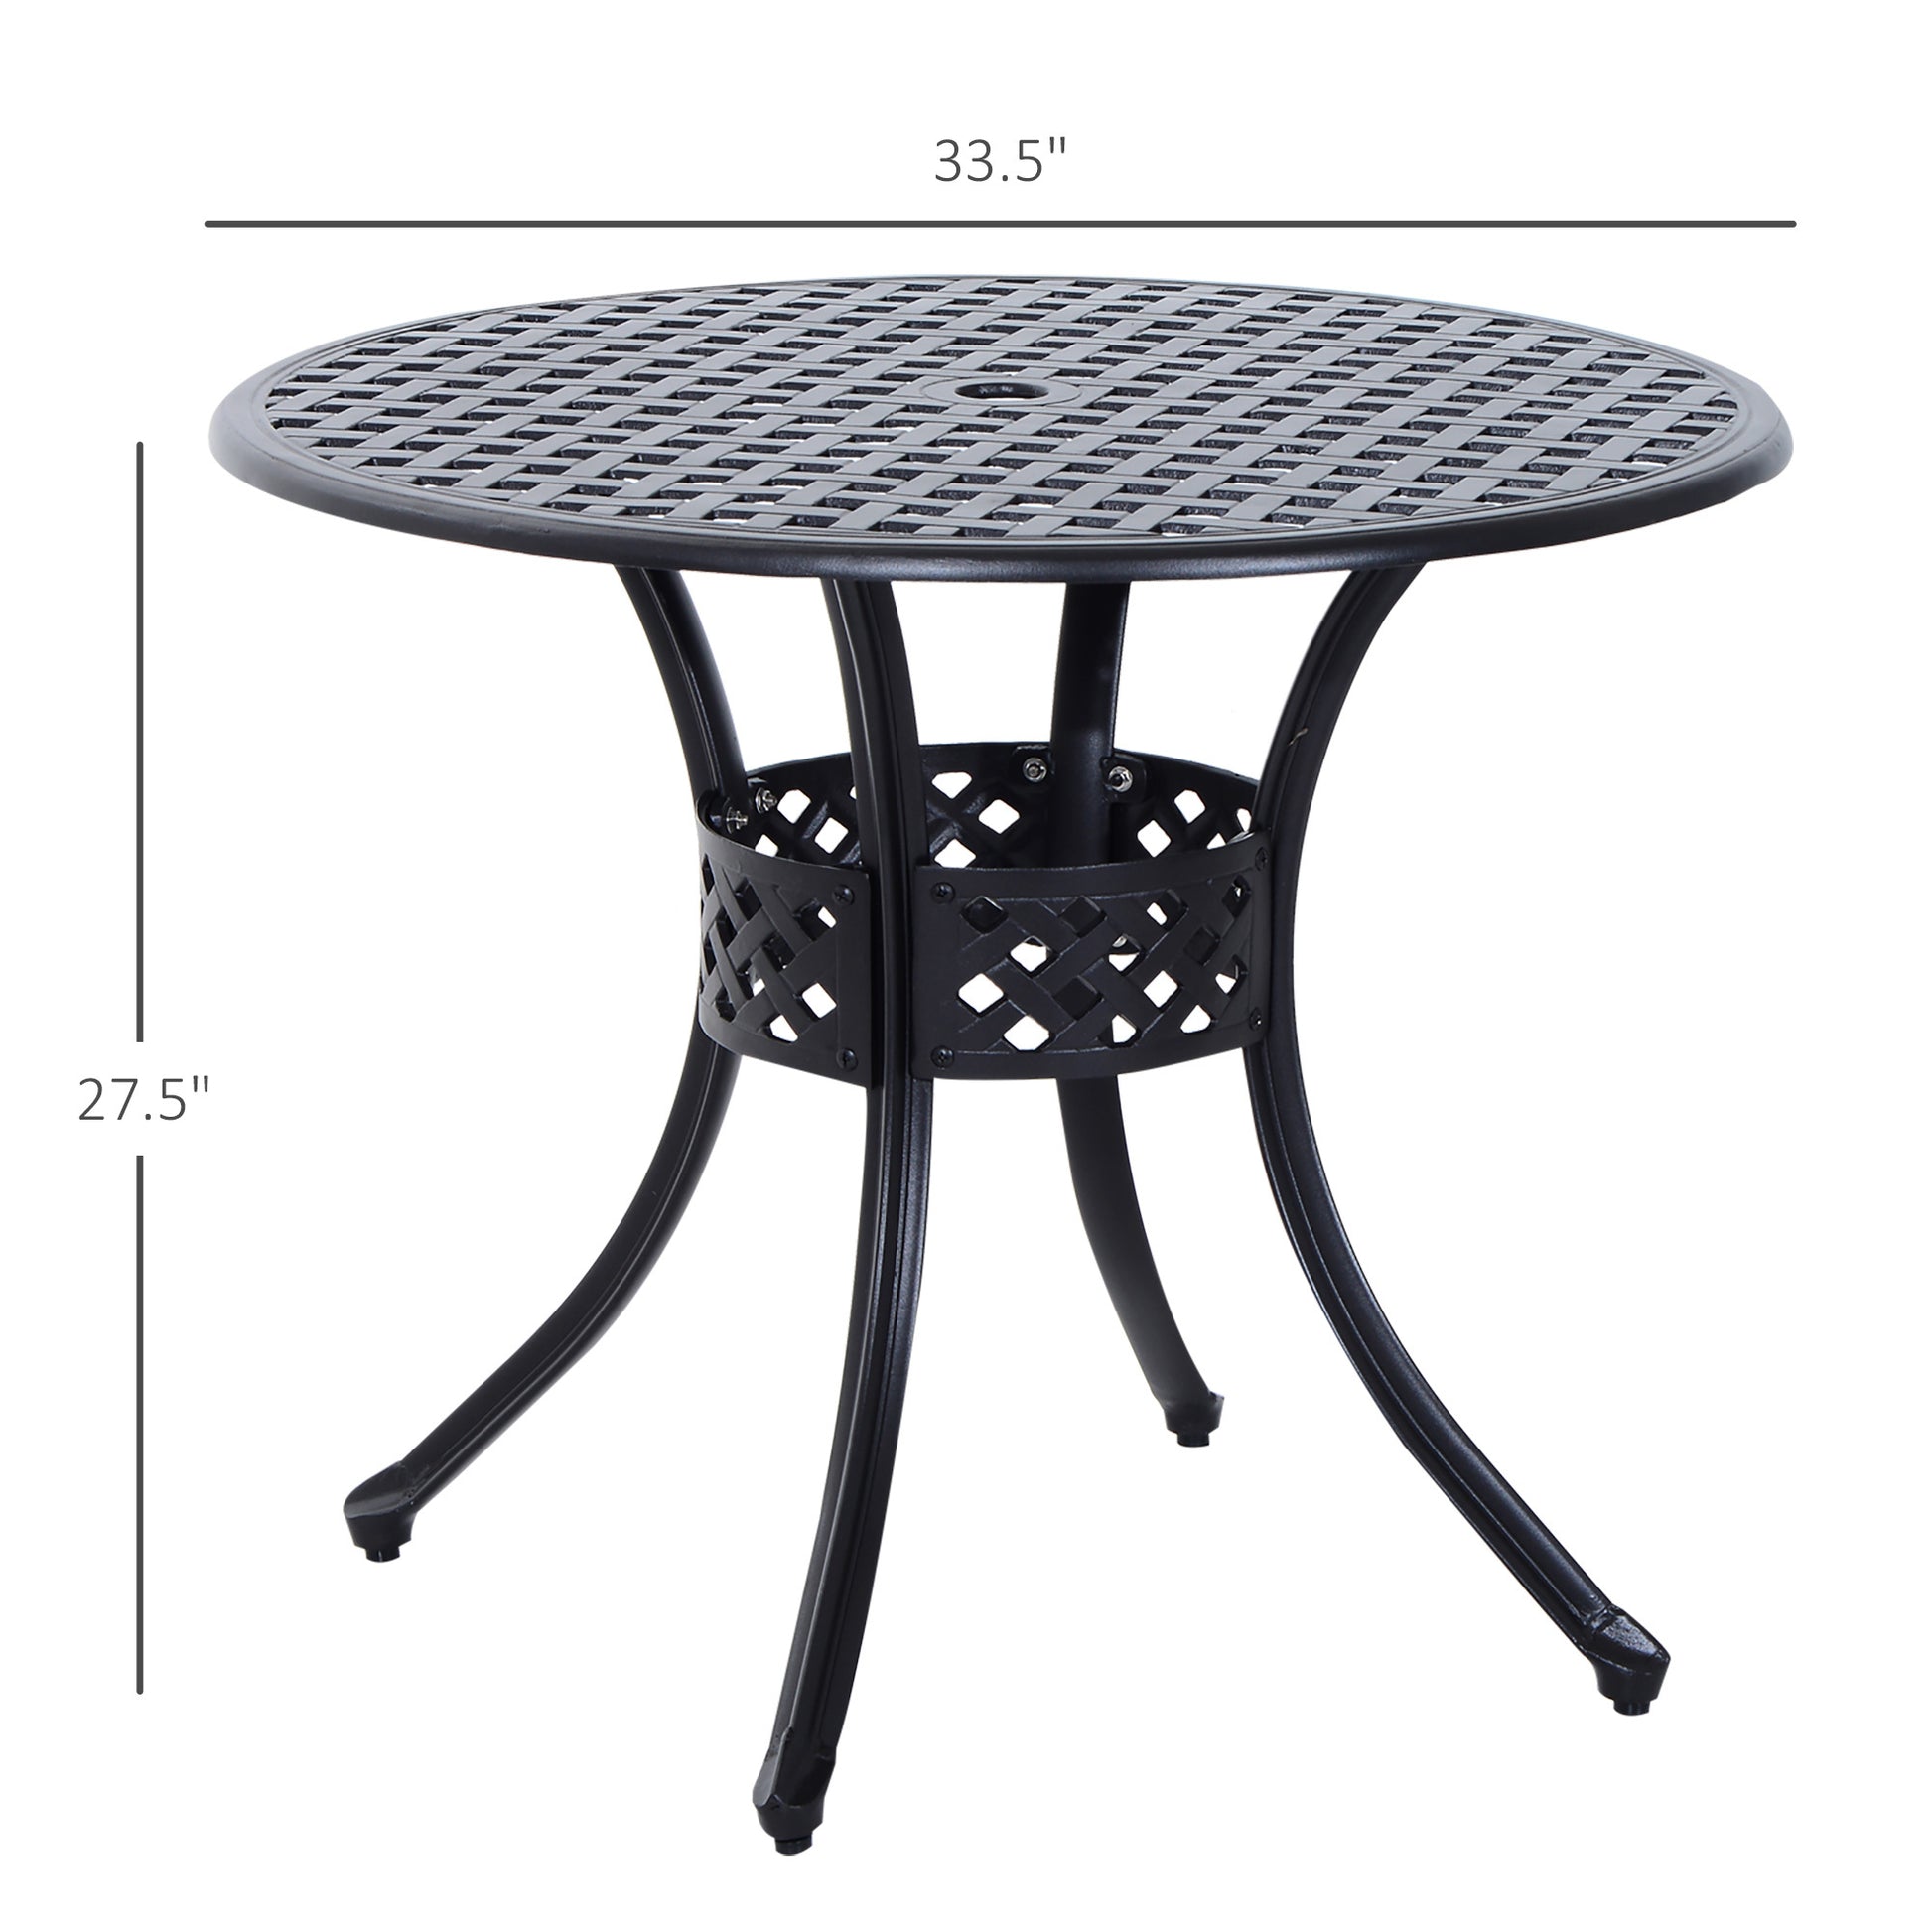 Outsunny 33" Patio Dining Table Round Cast